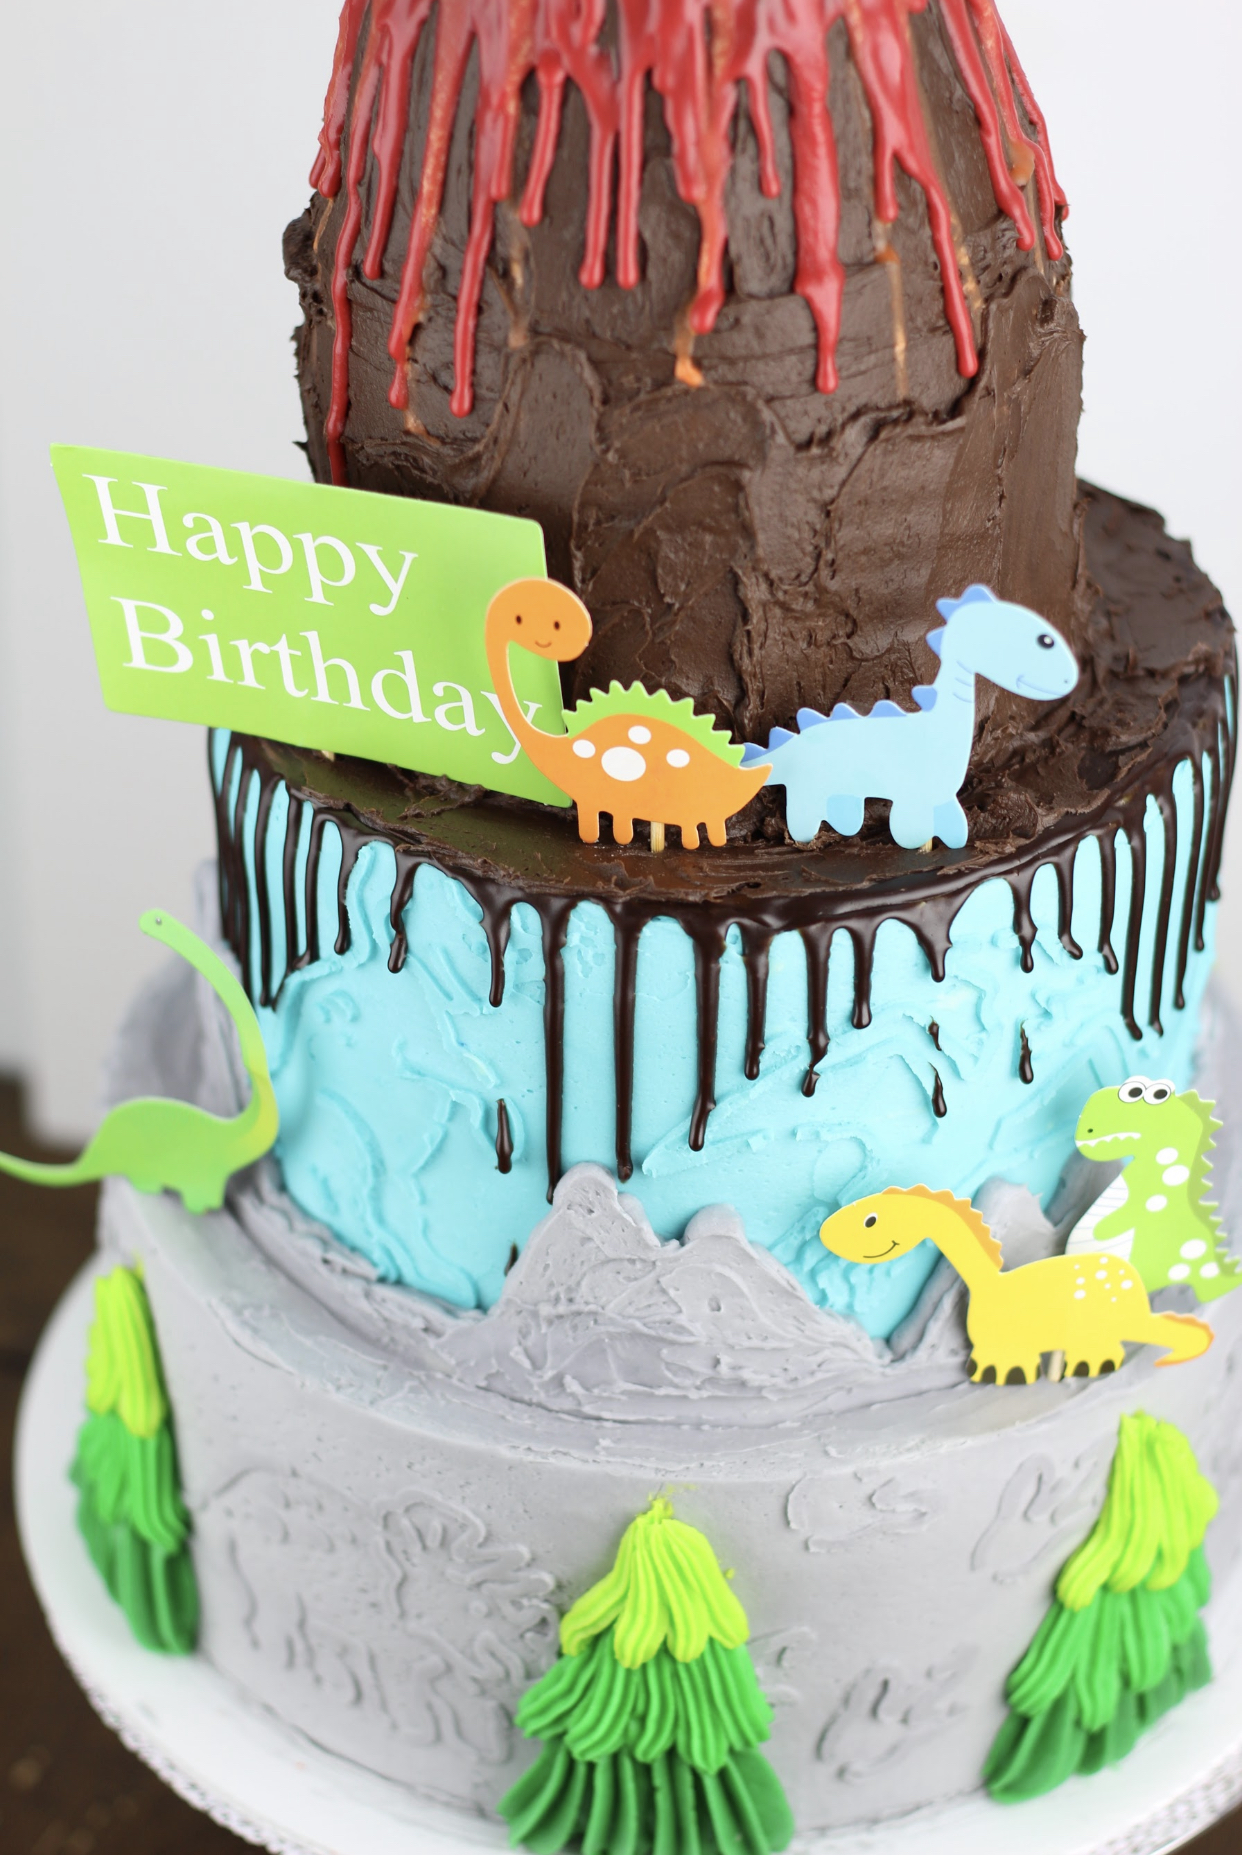 Learn how I made this Dinosaur Theme Cake with an active volcano. I'm sharing the exact schedule I use to decorate a birthday cake for my kids. Learn how to decorate a birthday cake of your kids dreams.